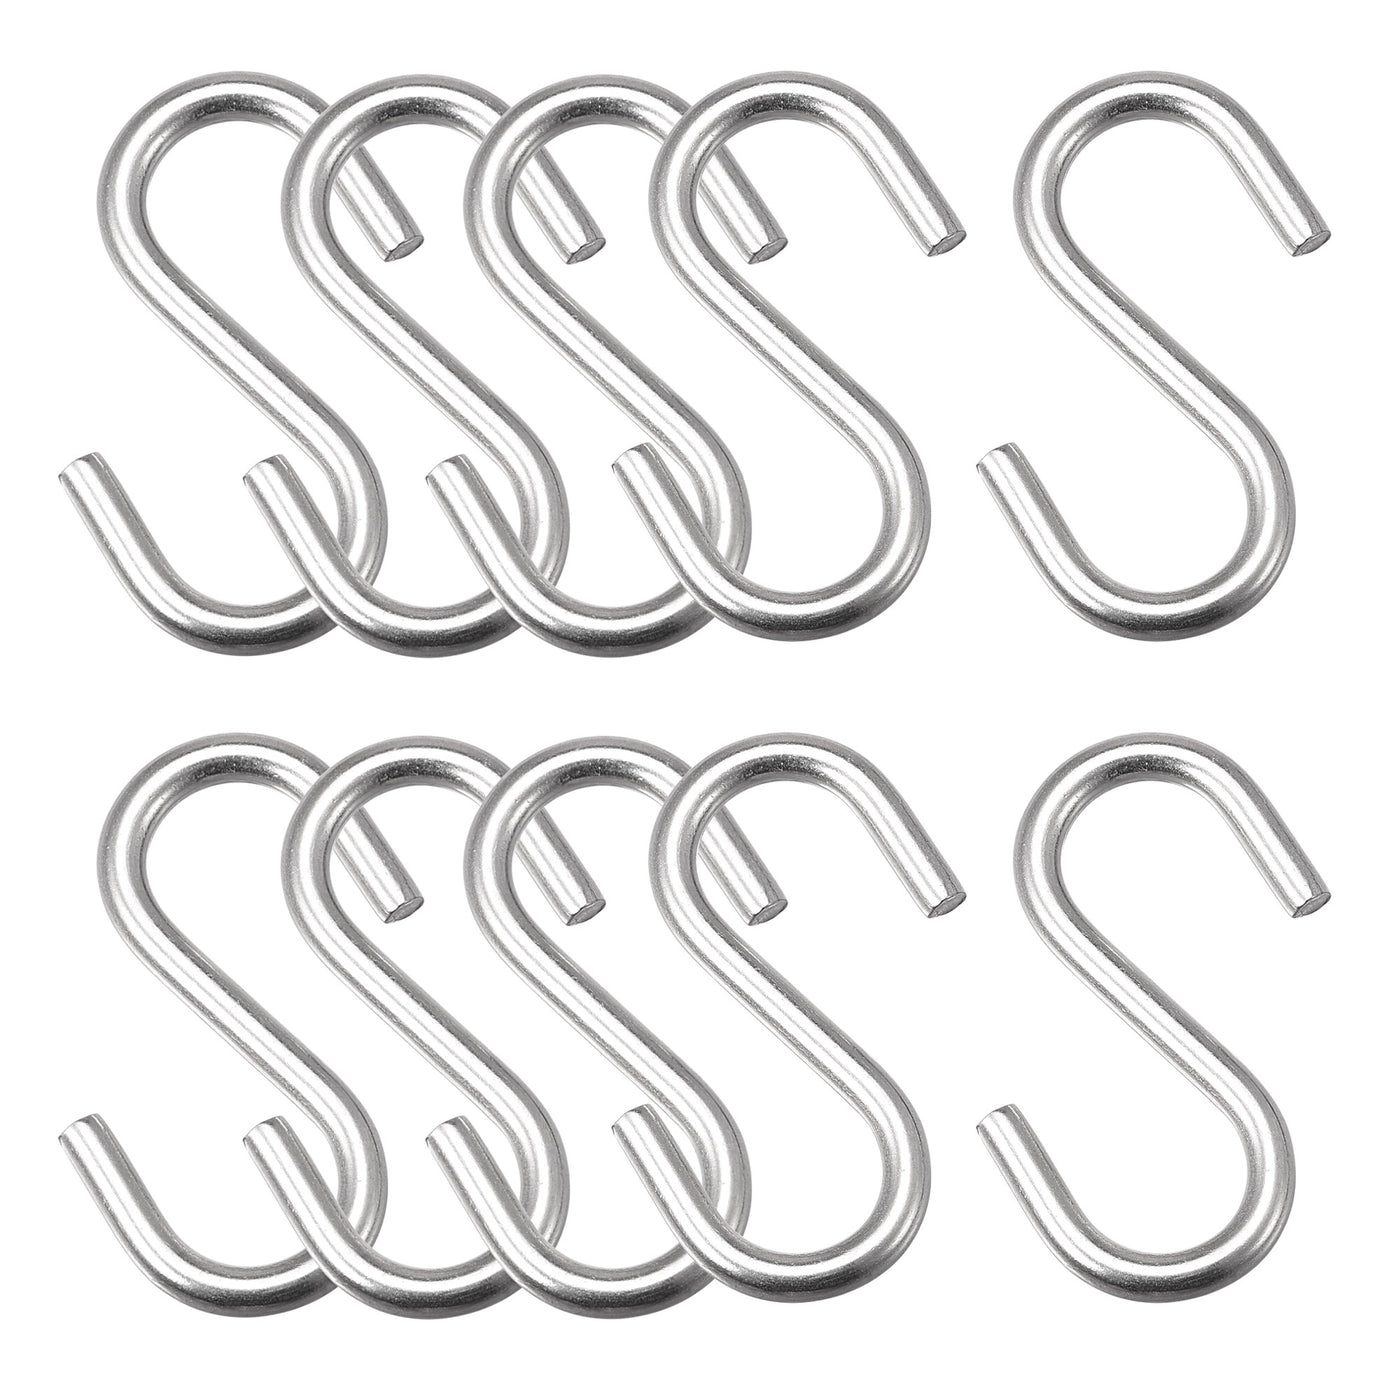 uxcell Uxcell S Hooks 2.28" Long Stainless Steel Hanger for Hanging Objects in Kitchen, Garden, Bathroom, Garage 15Pcs